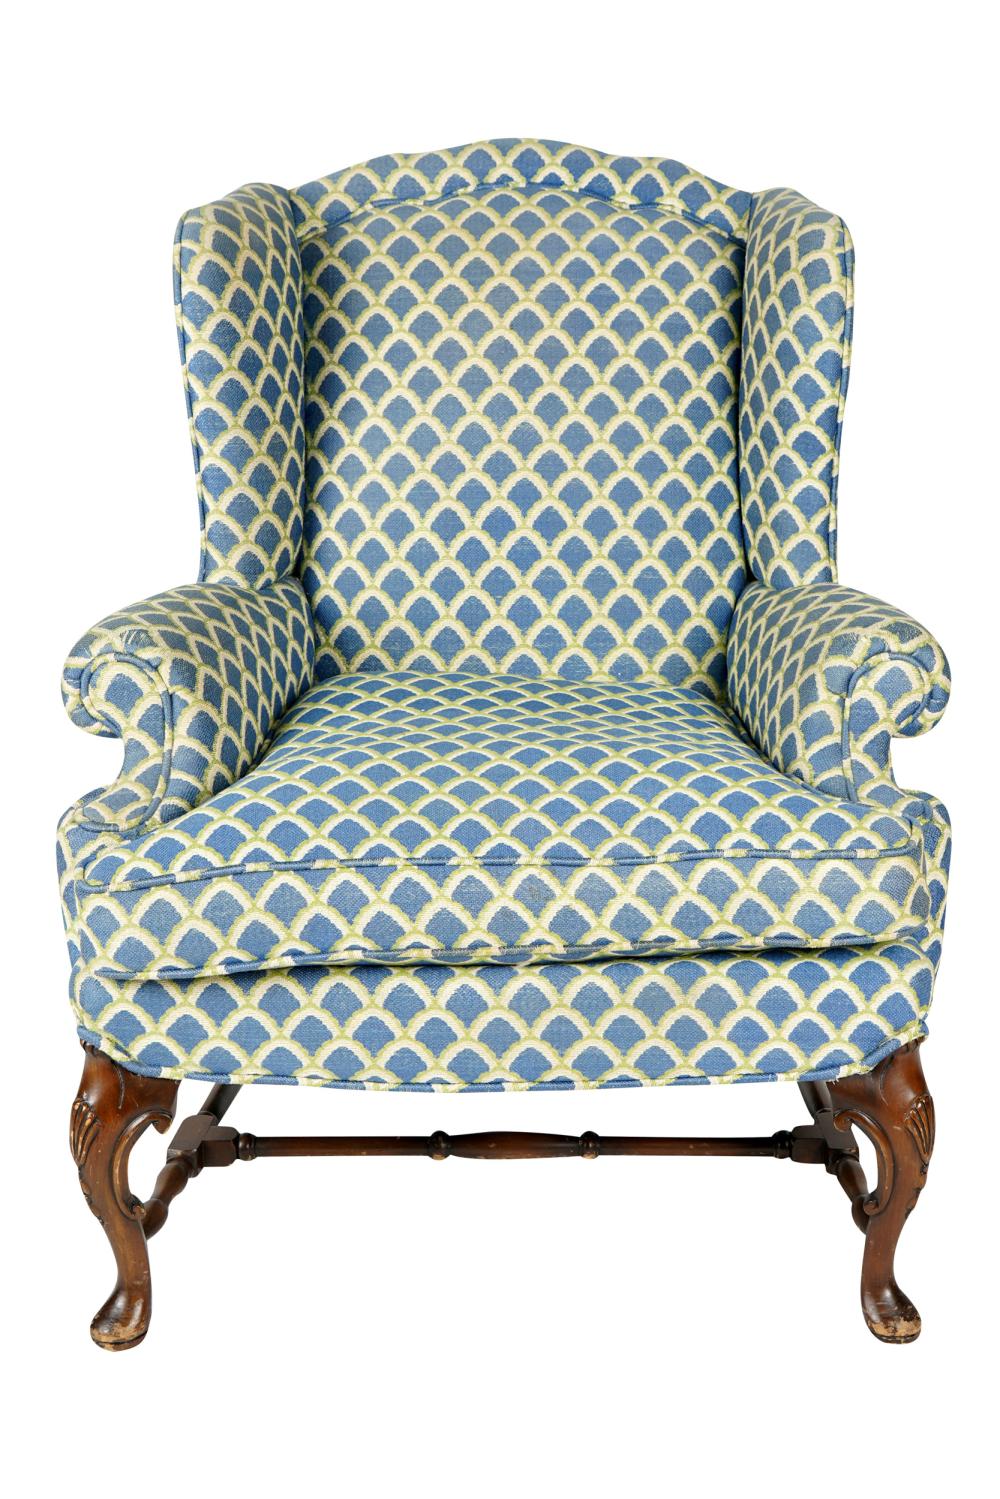 QUEEN ANNE STYLE ARMCHAIRcovered with